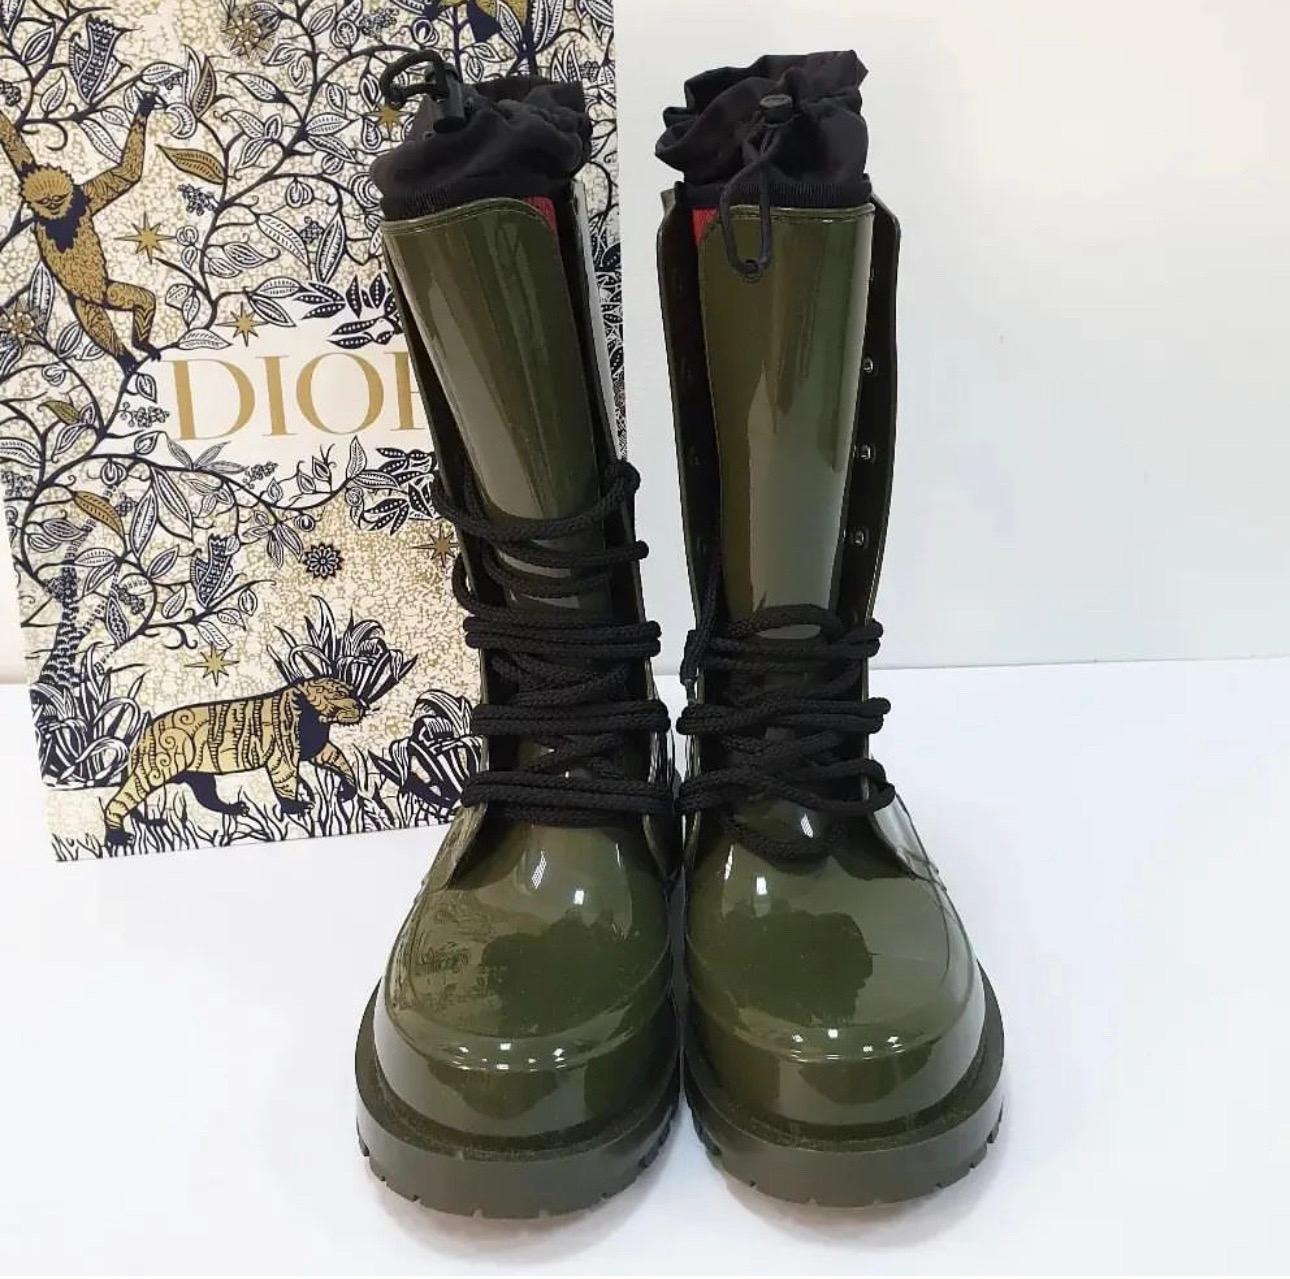 These gorgeous rain boots by Dior will elevate your closet instantly. Crafted in Italy, this pair is made of glossy rubber and comes in a shade of army of green. They exude style and sophistication and are great for day and night looks. They come